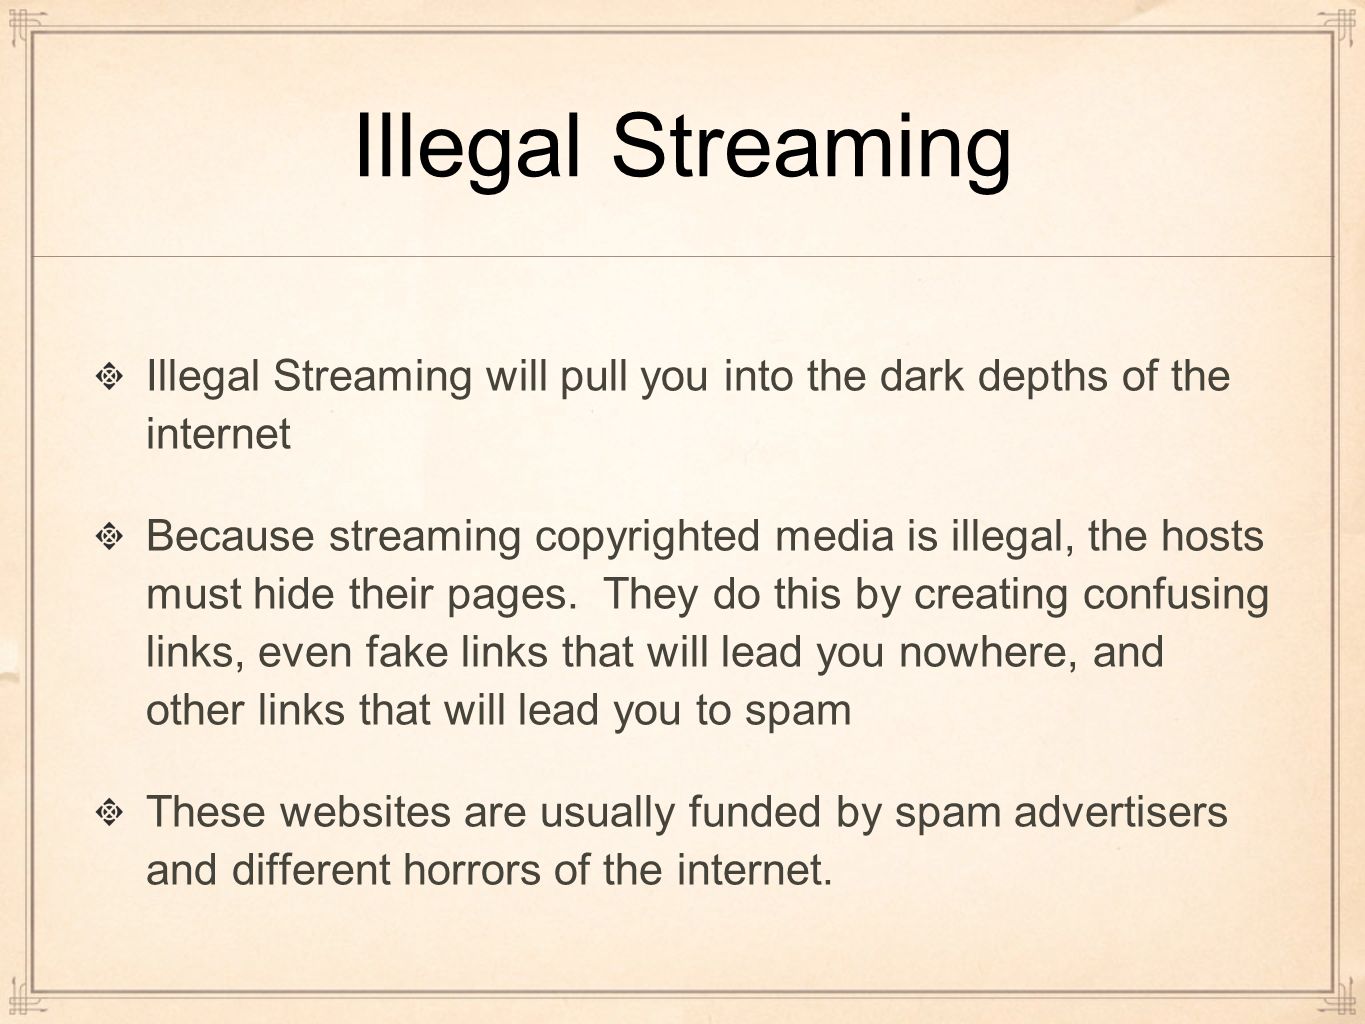 Illegal Streaming Illegal Streaming will pull you into the dark depths of the internet Because streaming copyrighted media is illegal, the hosts must hide their pages.